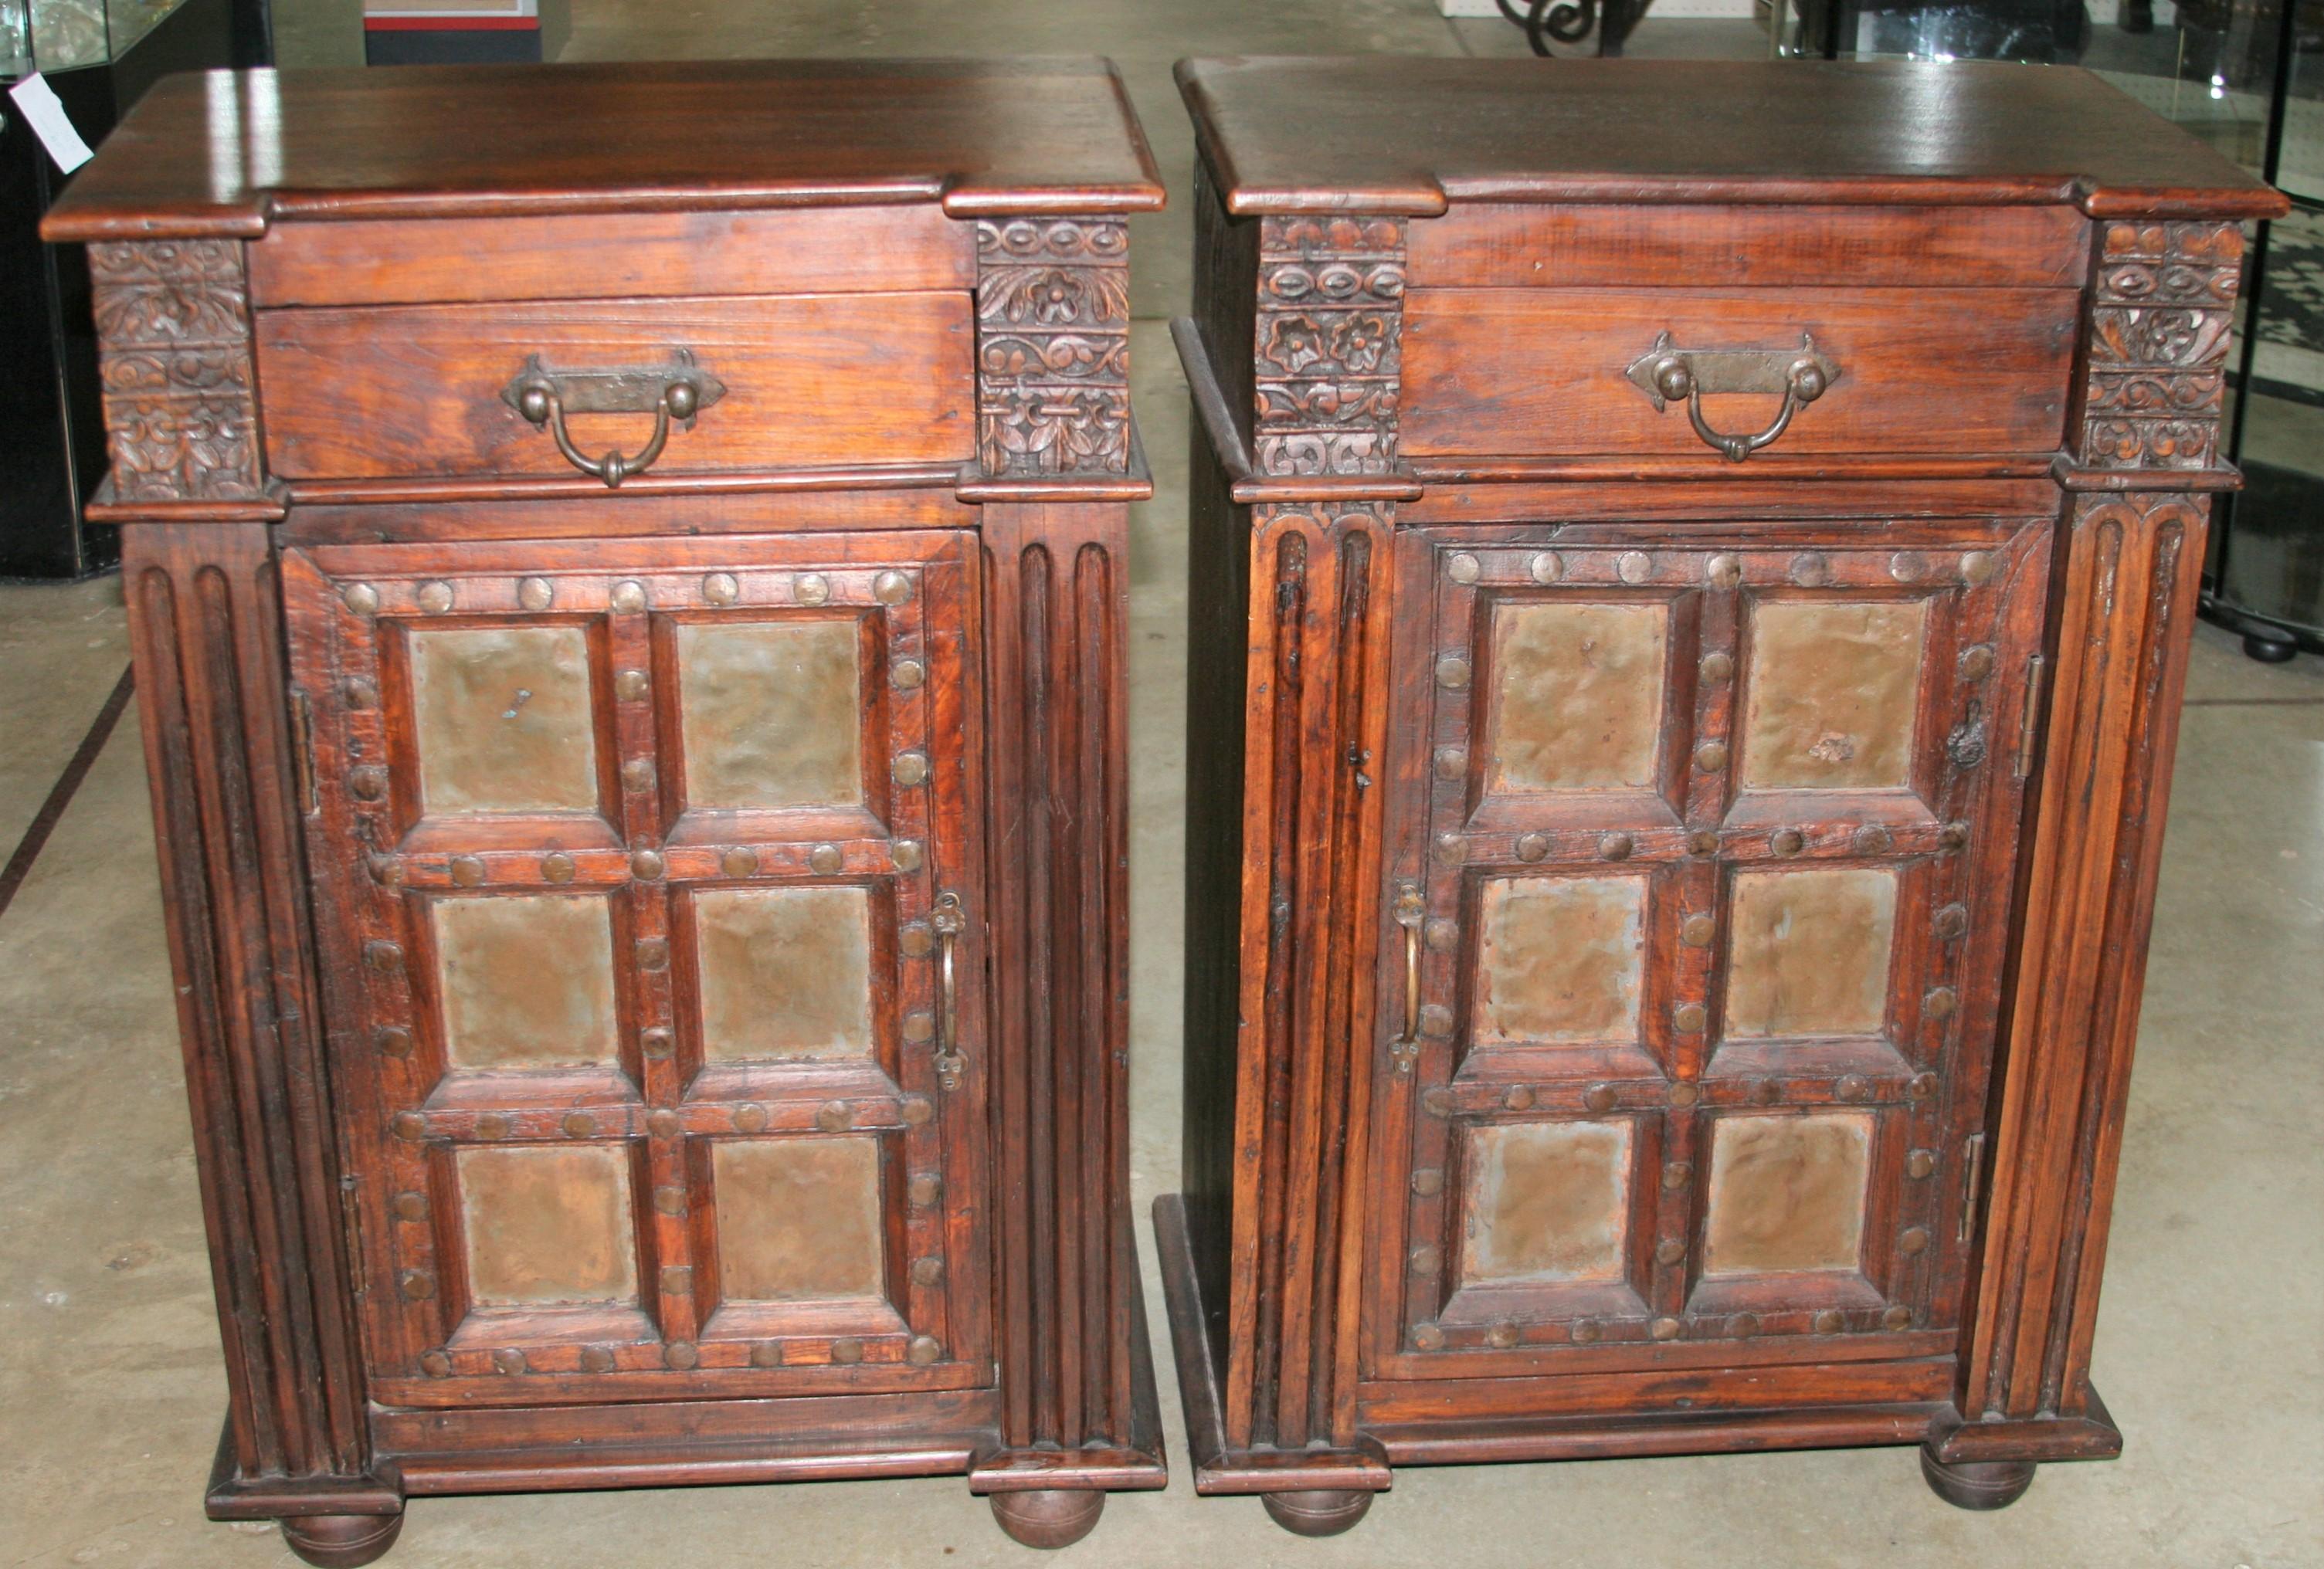 The bottom doors for the nightstands come from metal reinforced entry doors used in 1820s home. See the door thickness and the metal sheet covering the door. The stands teak wood come from wooden beams used in the 19th century homes. Though it is